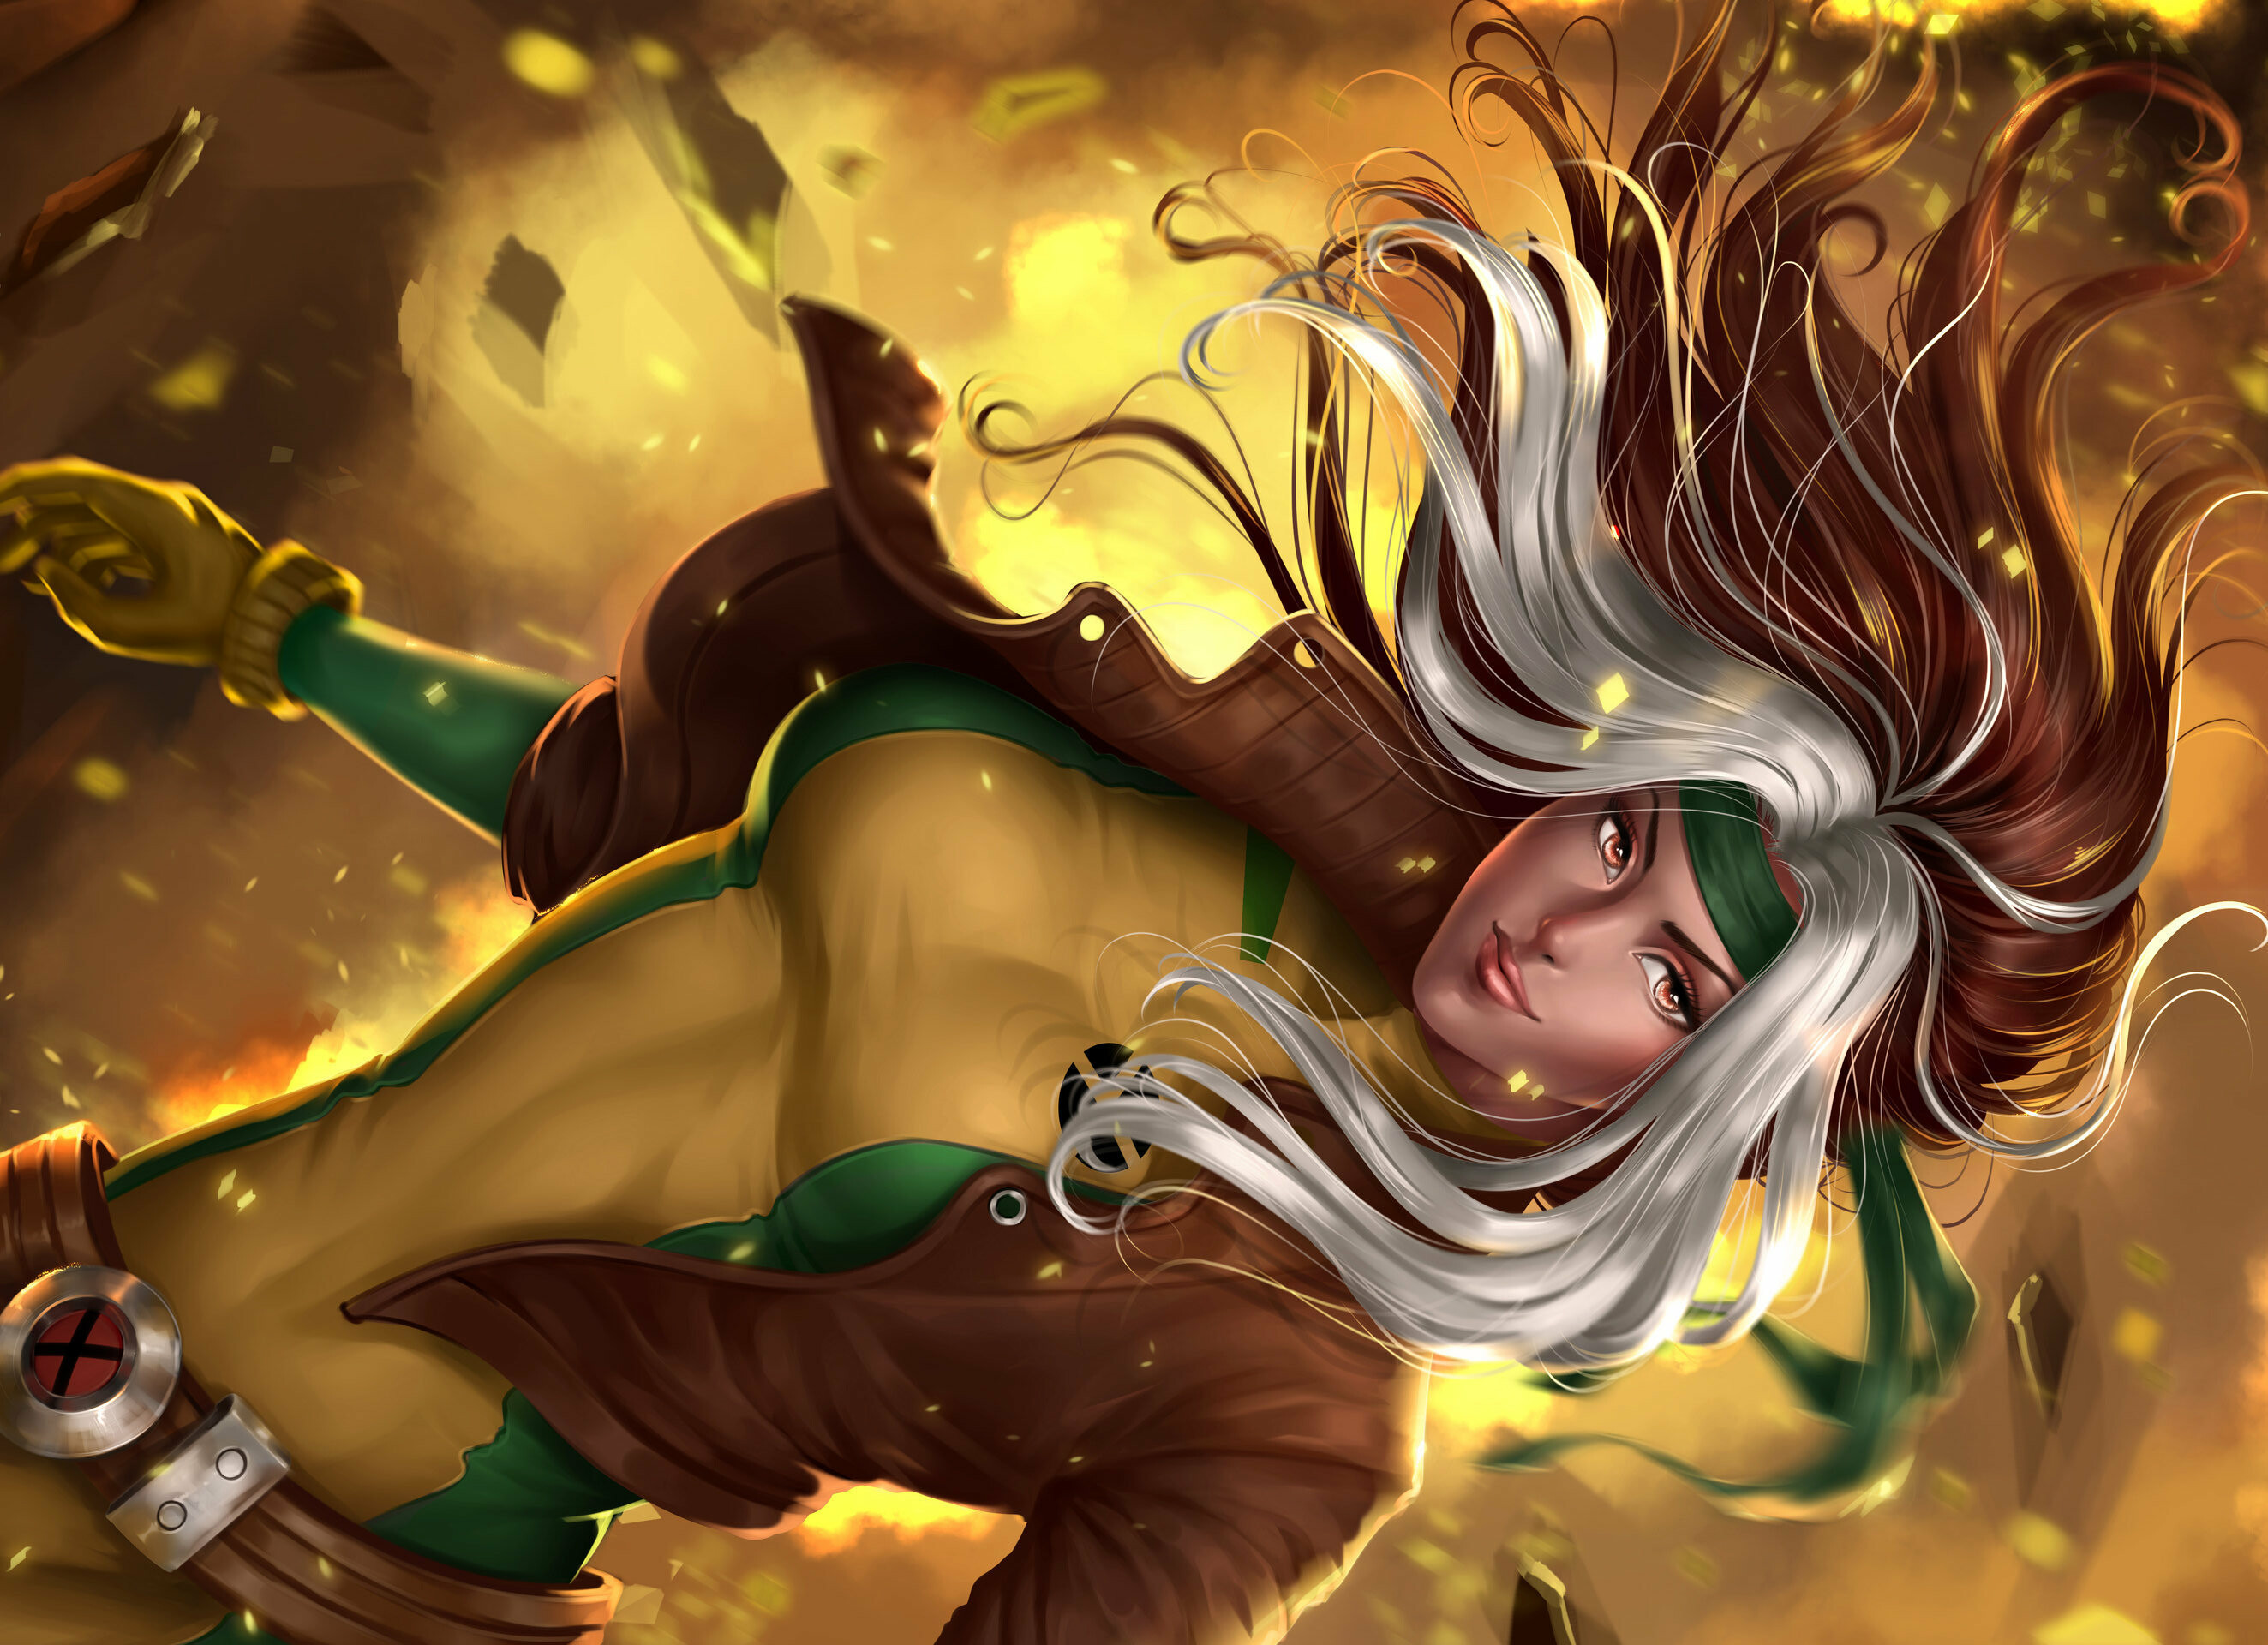 Rogue (Marvel): Anna Marie, A mutant, a fictional subspecies of humans born with an "X-gene" that grants superhuman abilities. 2650x1920 HD Wallpaper.